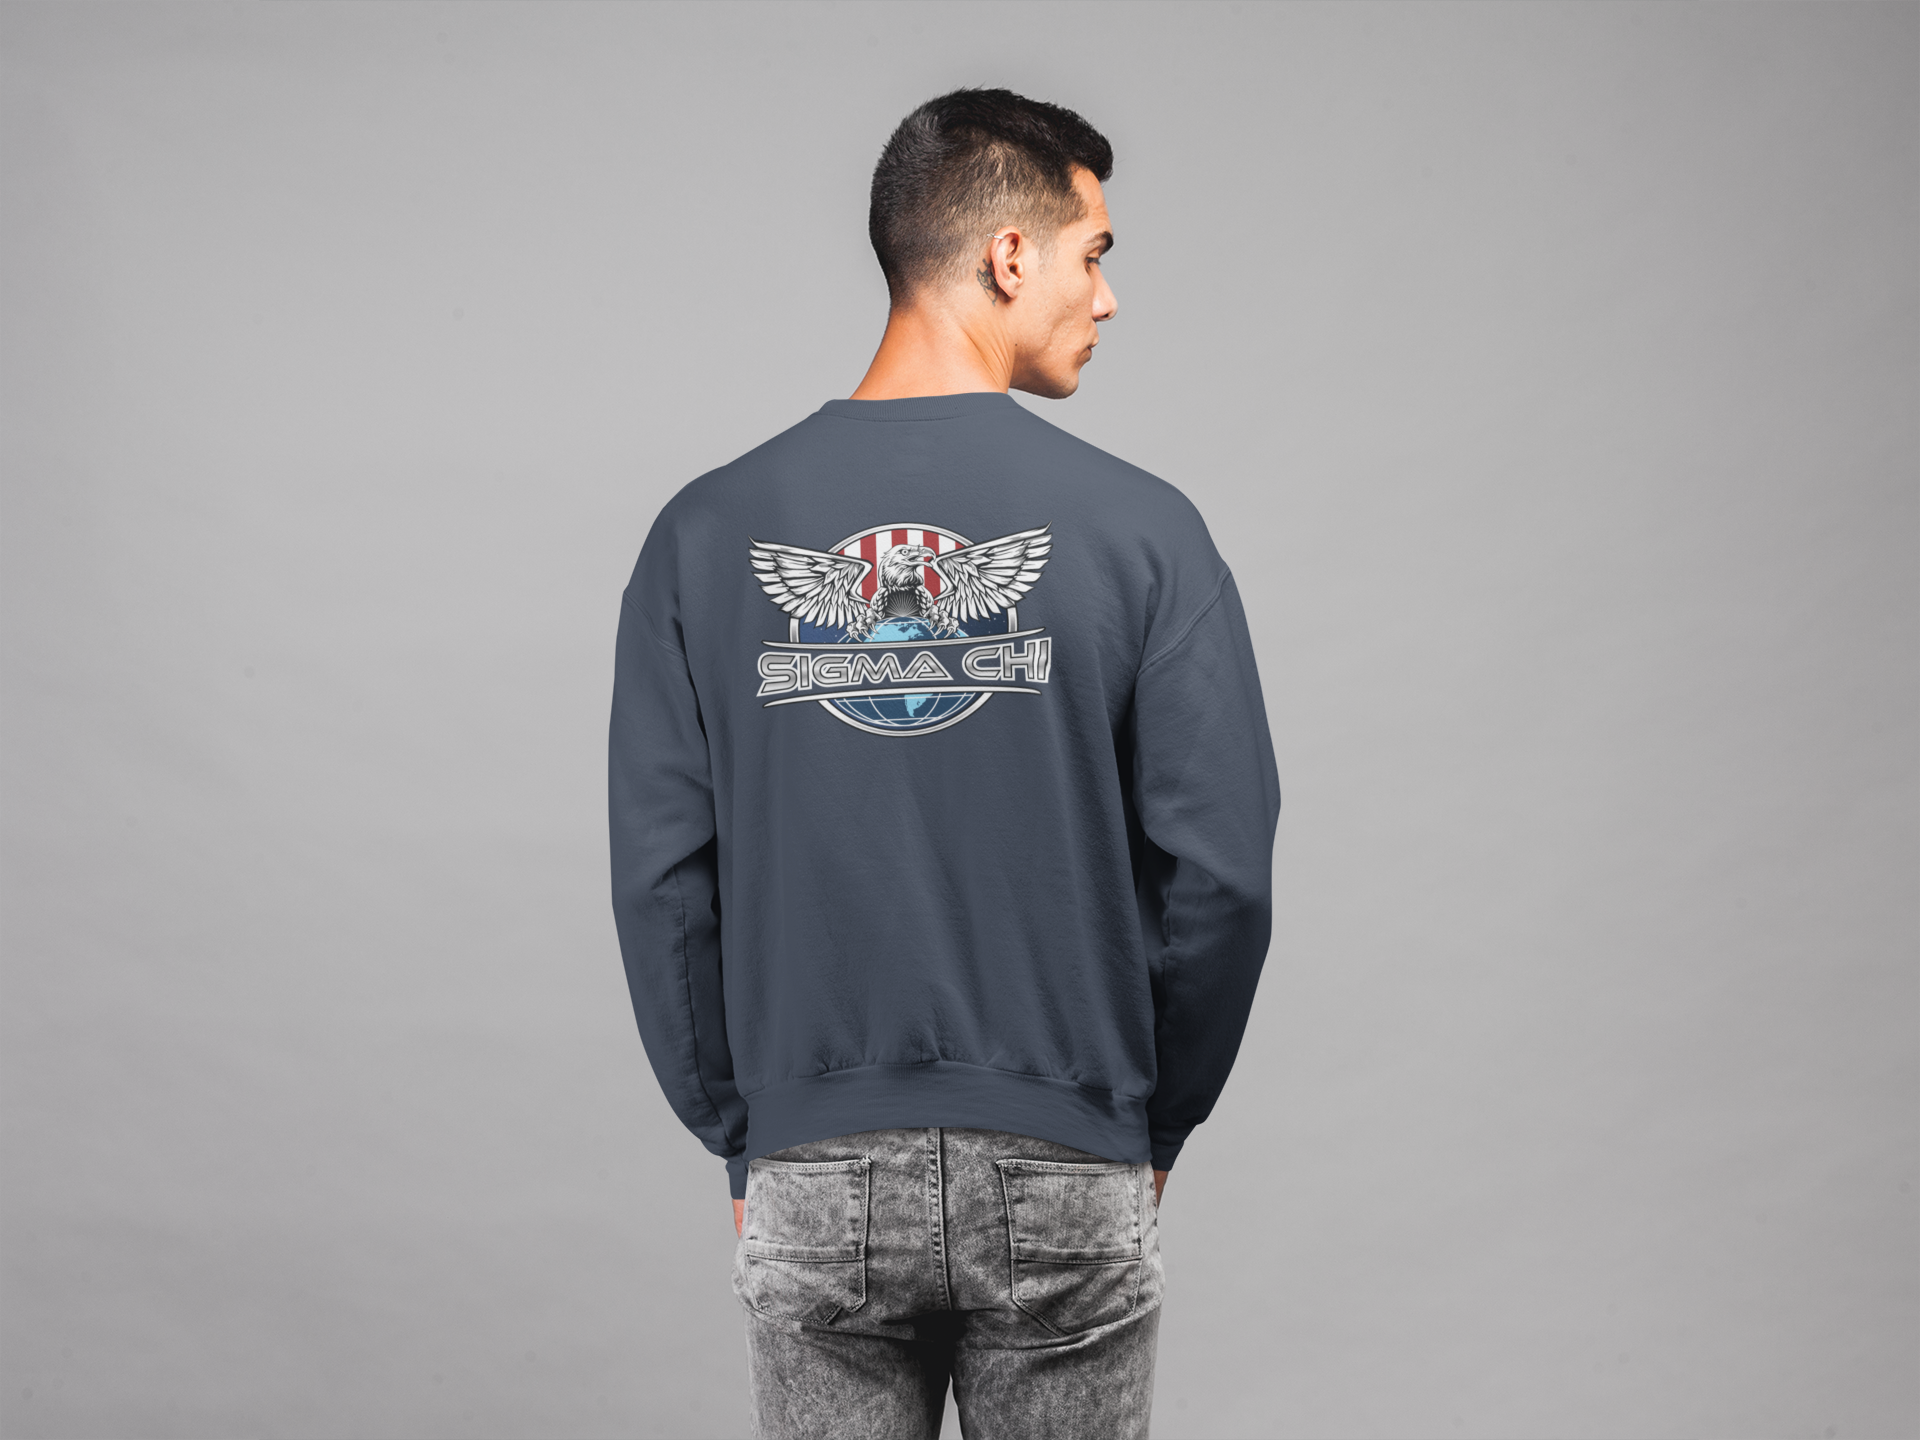 Sigma Chi Graphic Crewneck Sweatshirt | The Fraternal Order | Sigma Chi Fraternity Merch House back model 